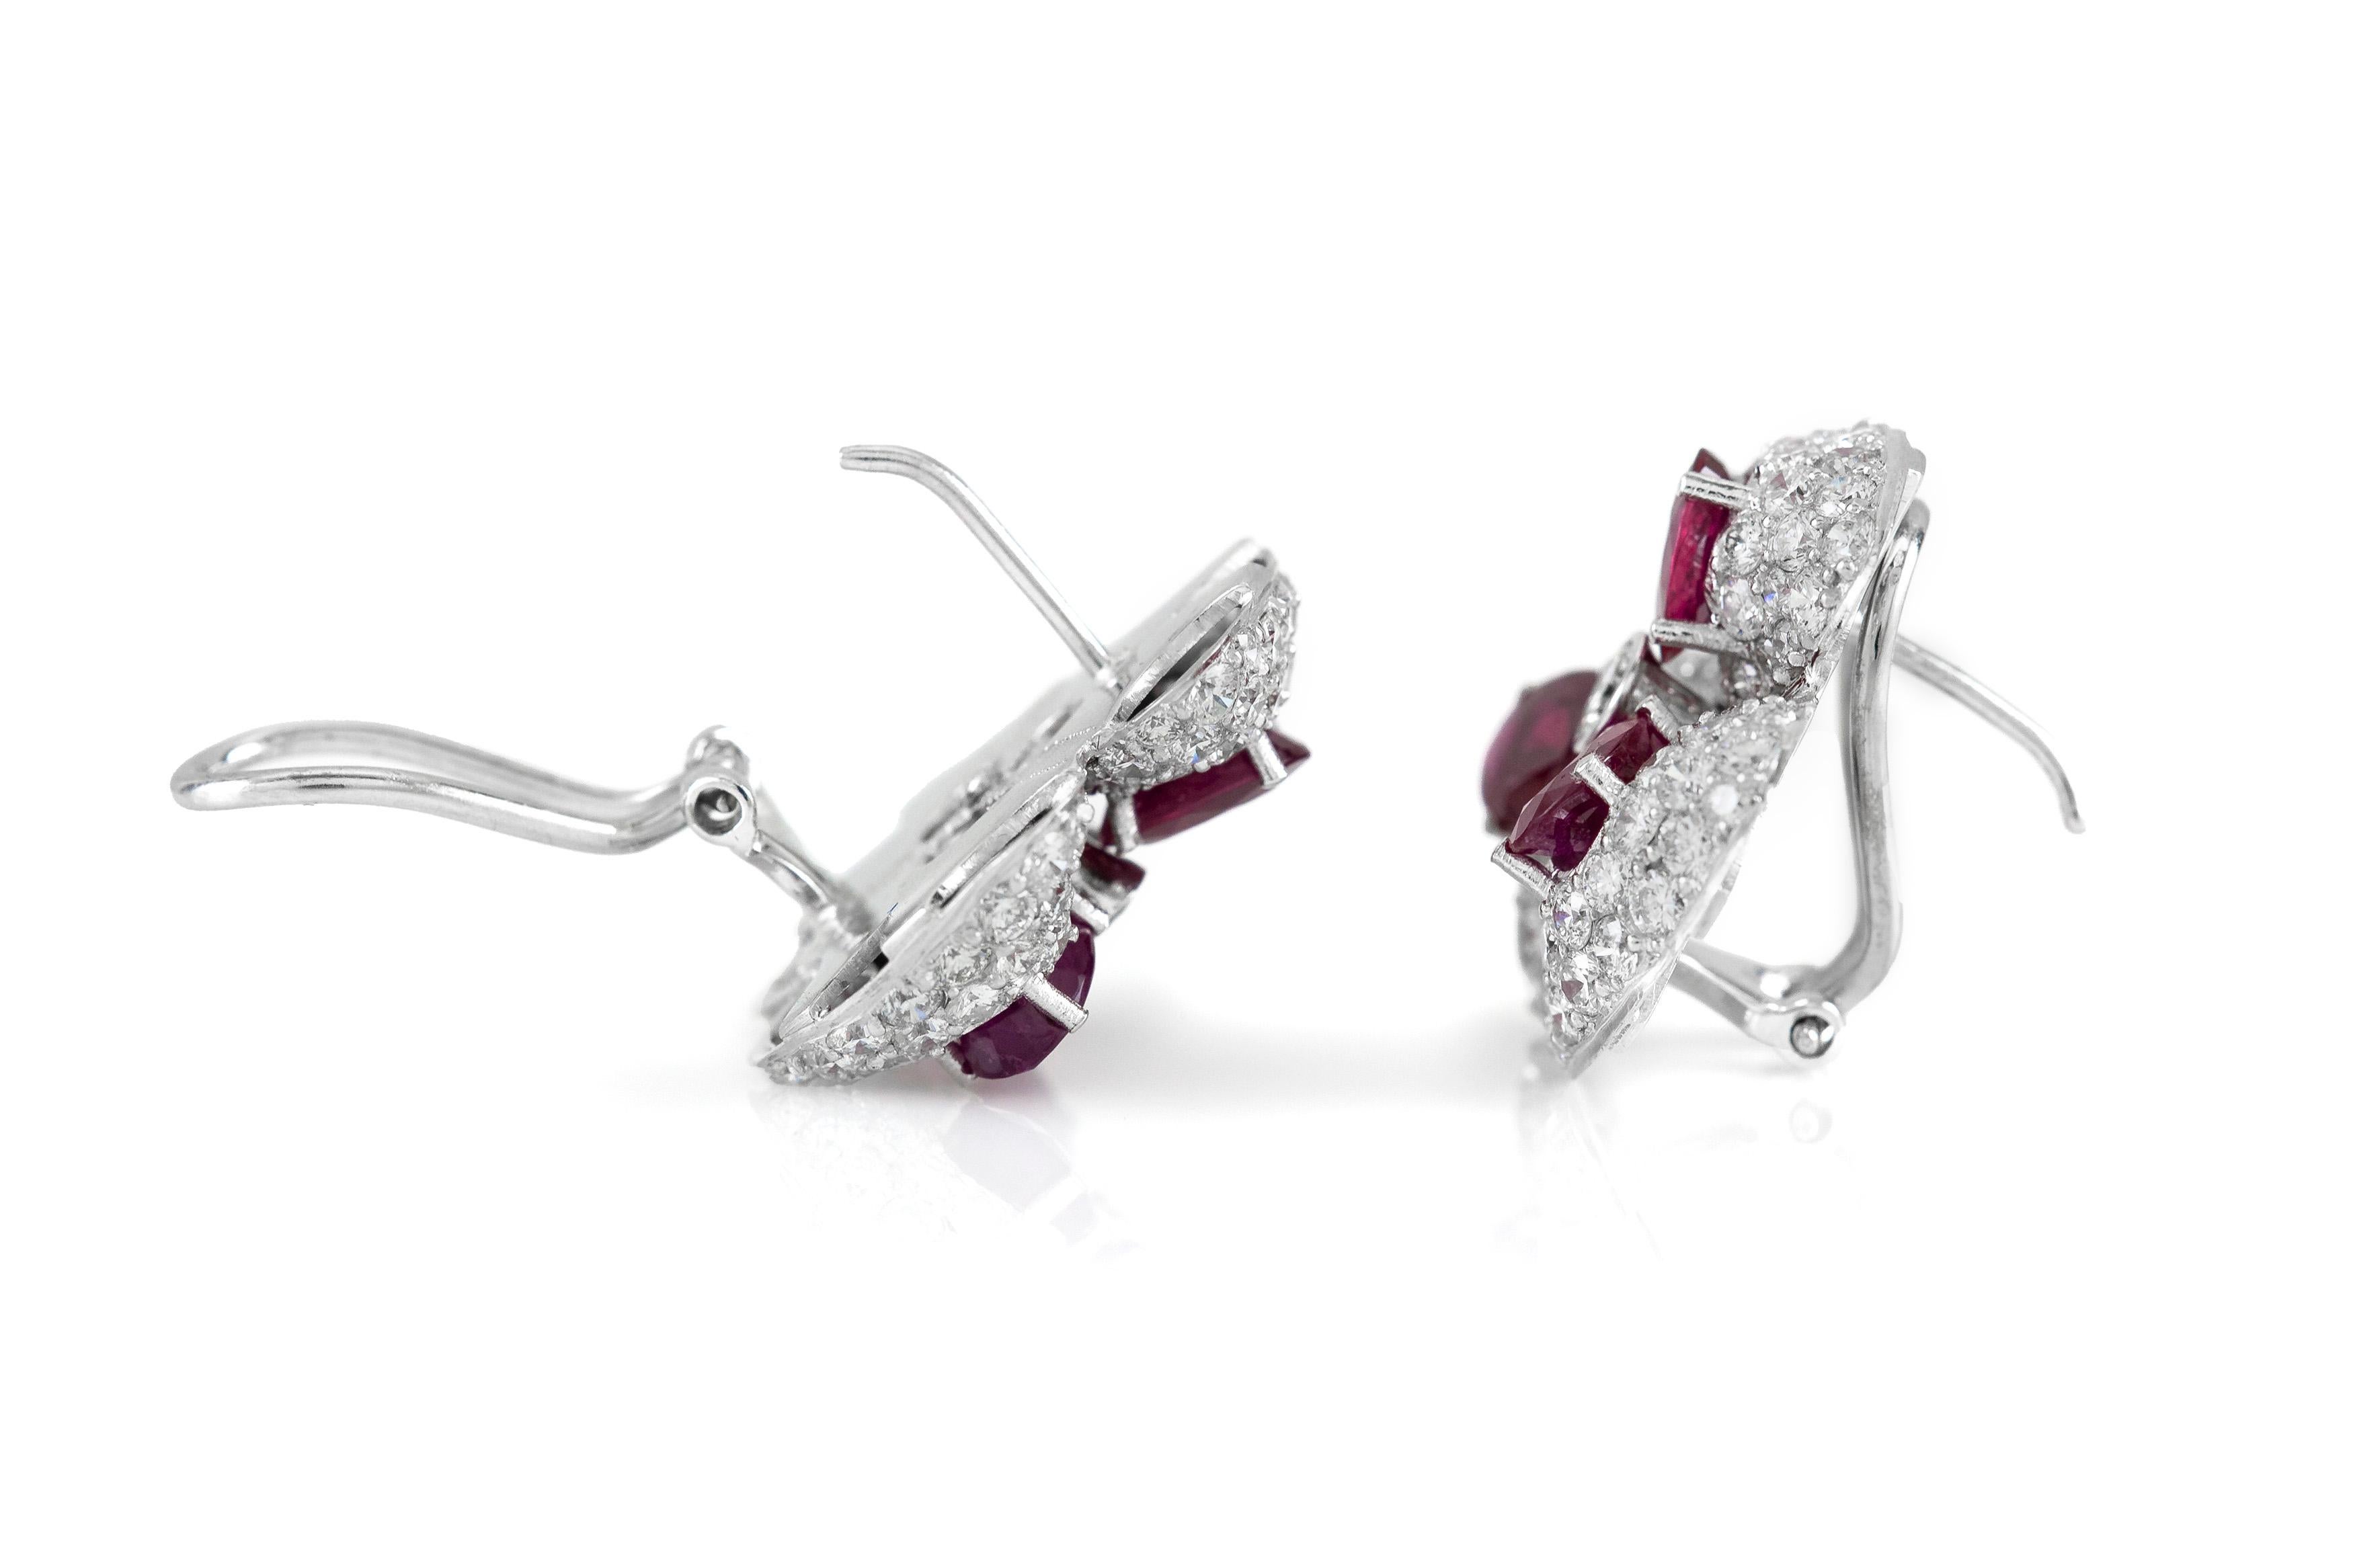 The earrings is finely crafted in 18k white gold with ruby weighing approximately total of 6.00 carat and diamonds weighing approximately total of 6.00 carat.